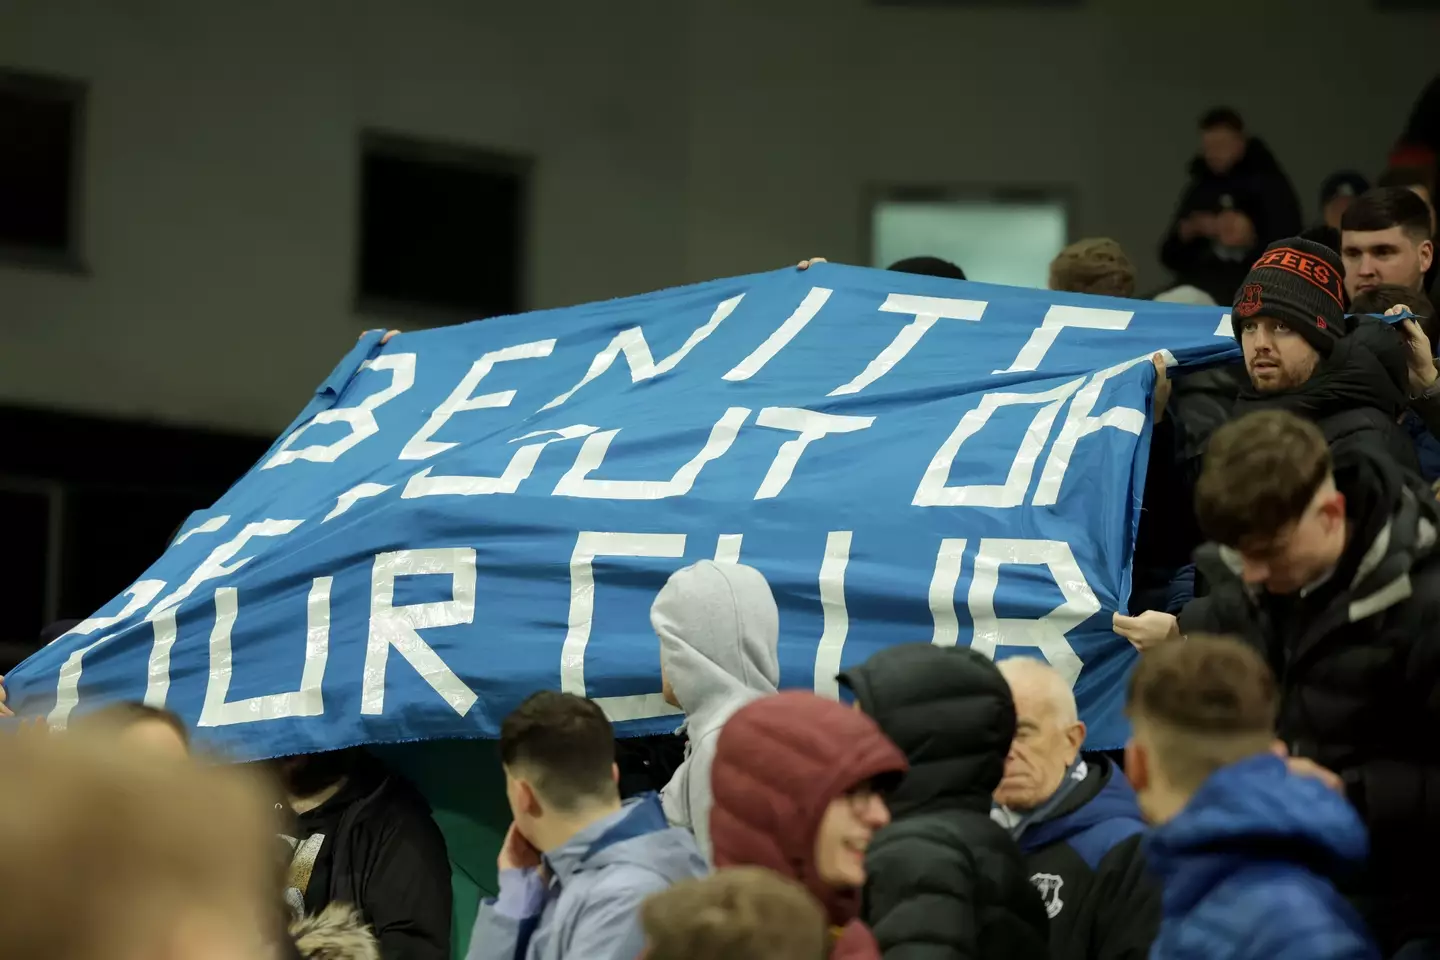 Fans with a banner at the Norwich game calling for Benitez out. Image: PA Images